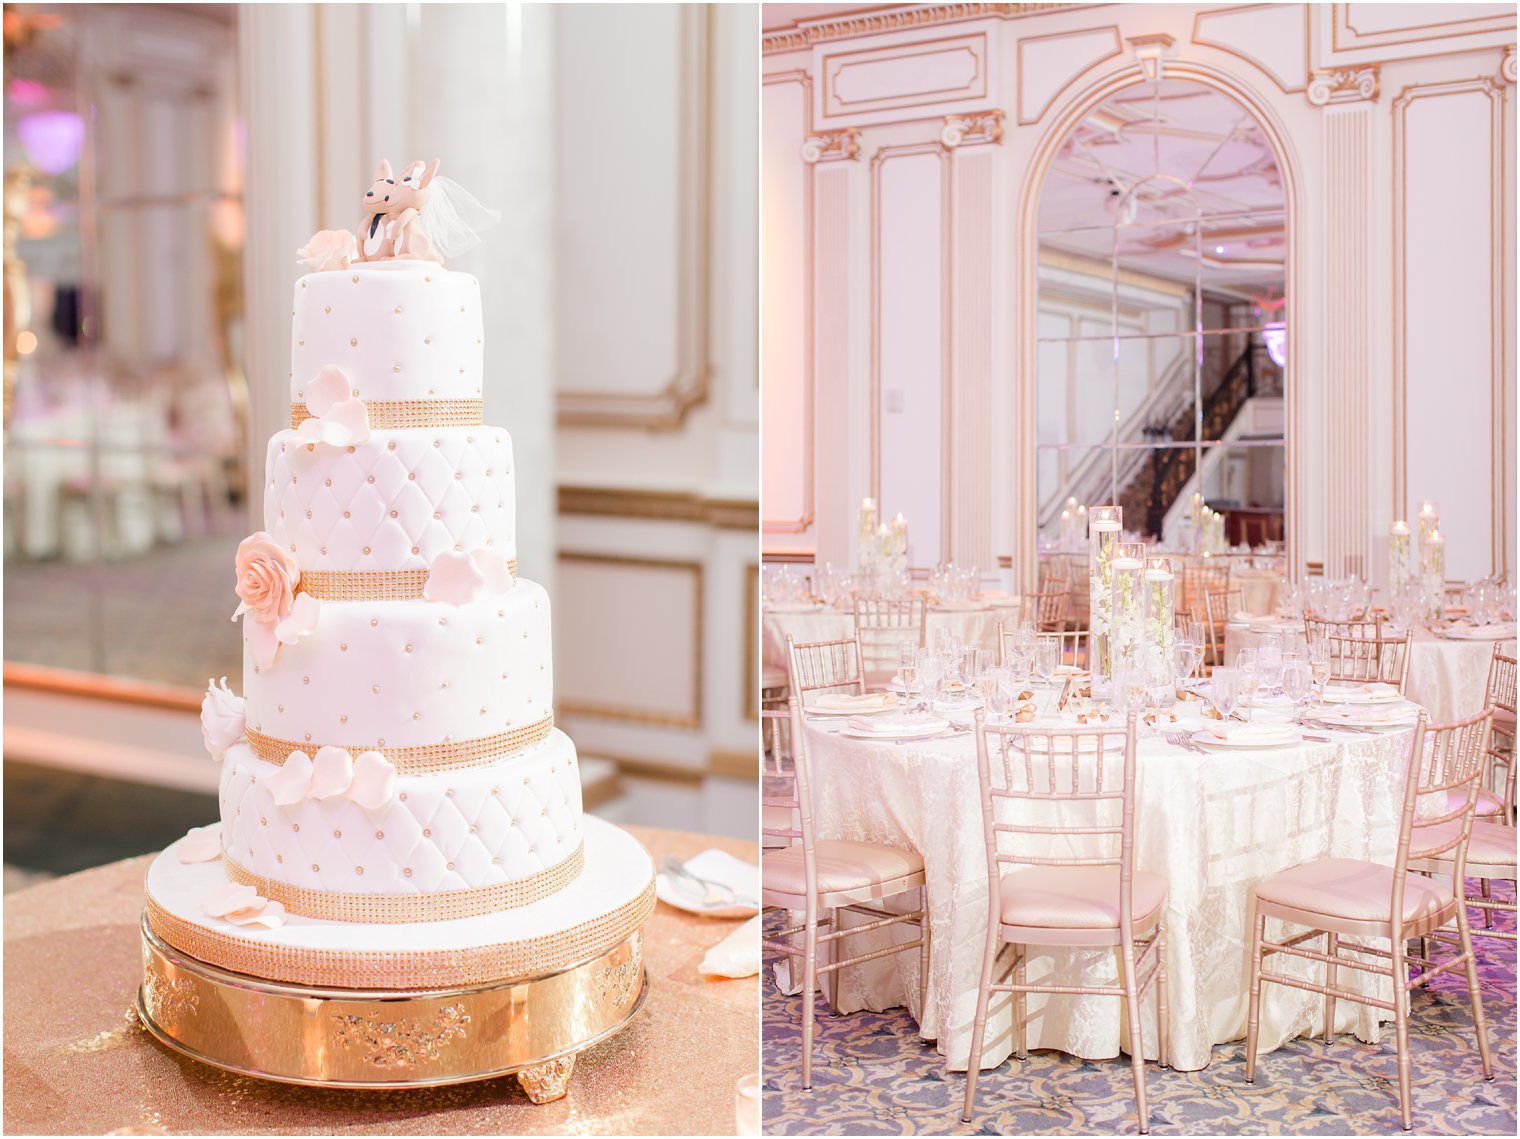 pink, white, and gold reception details at Legacy Castle and white and gold cake by Calandra's Bakery